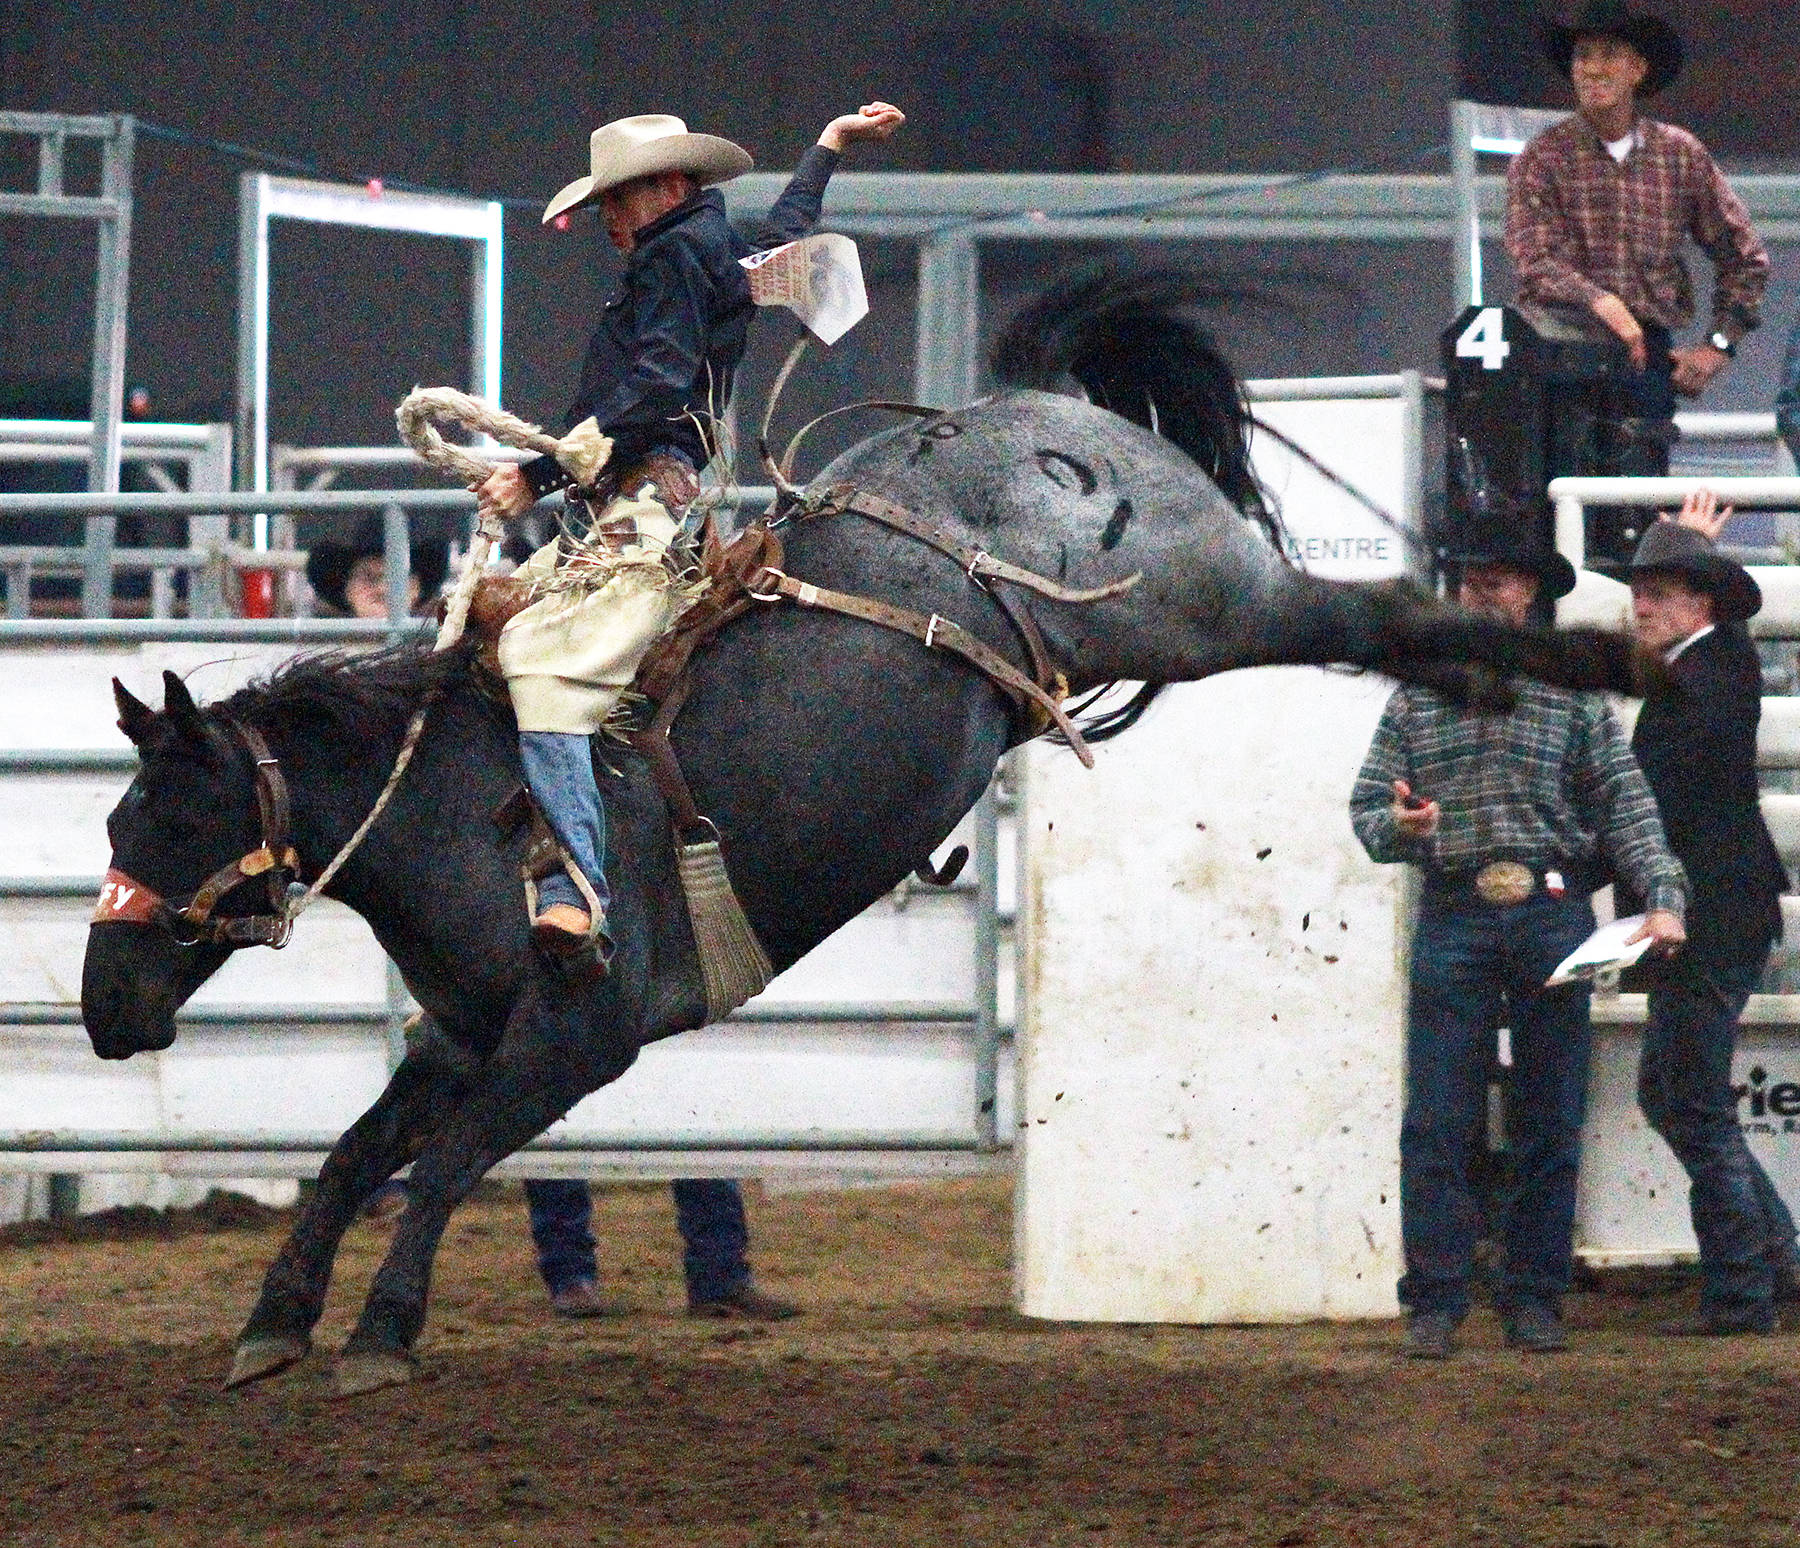 Kale MacKenzie on Styx holds on tight during the Winston Bruce Memorial and Match Bronc Riding. The event was also a fundraiser for the Winston Bruce Academy of Rodeo.